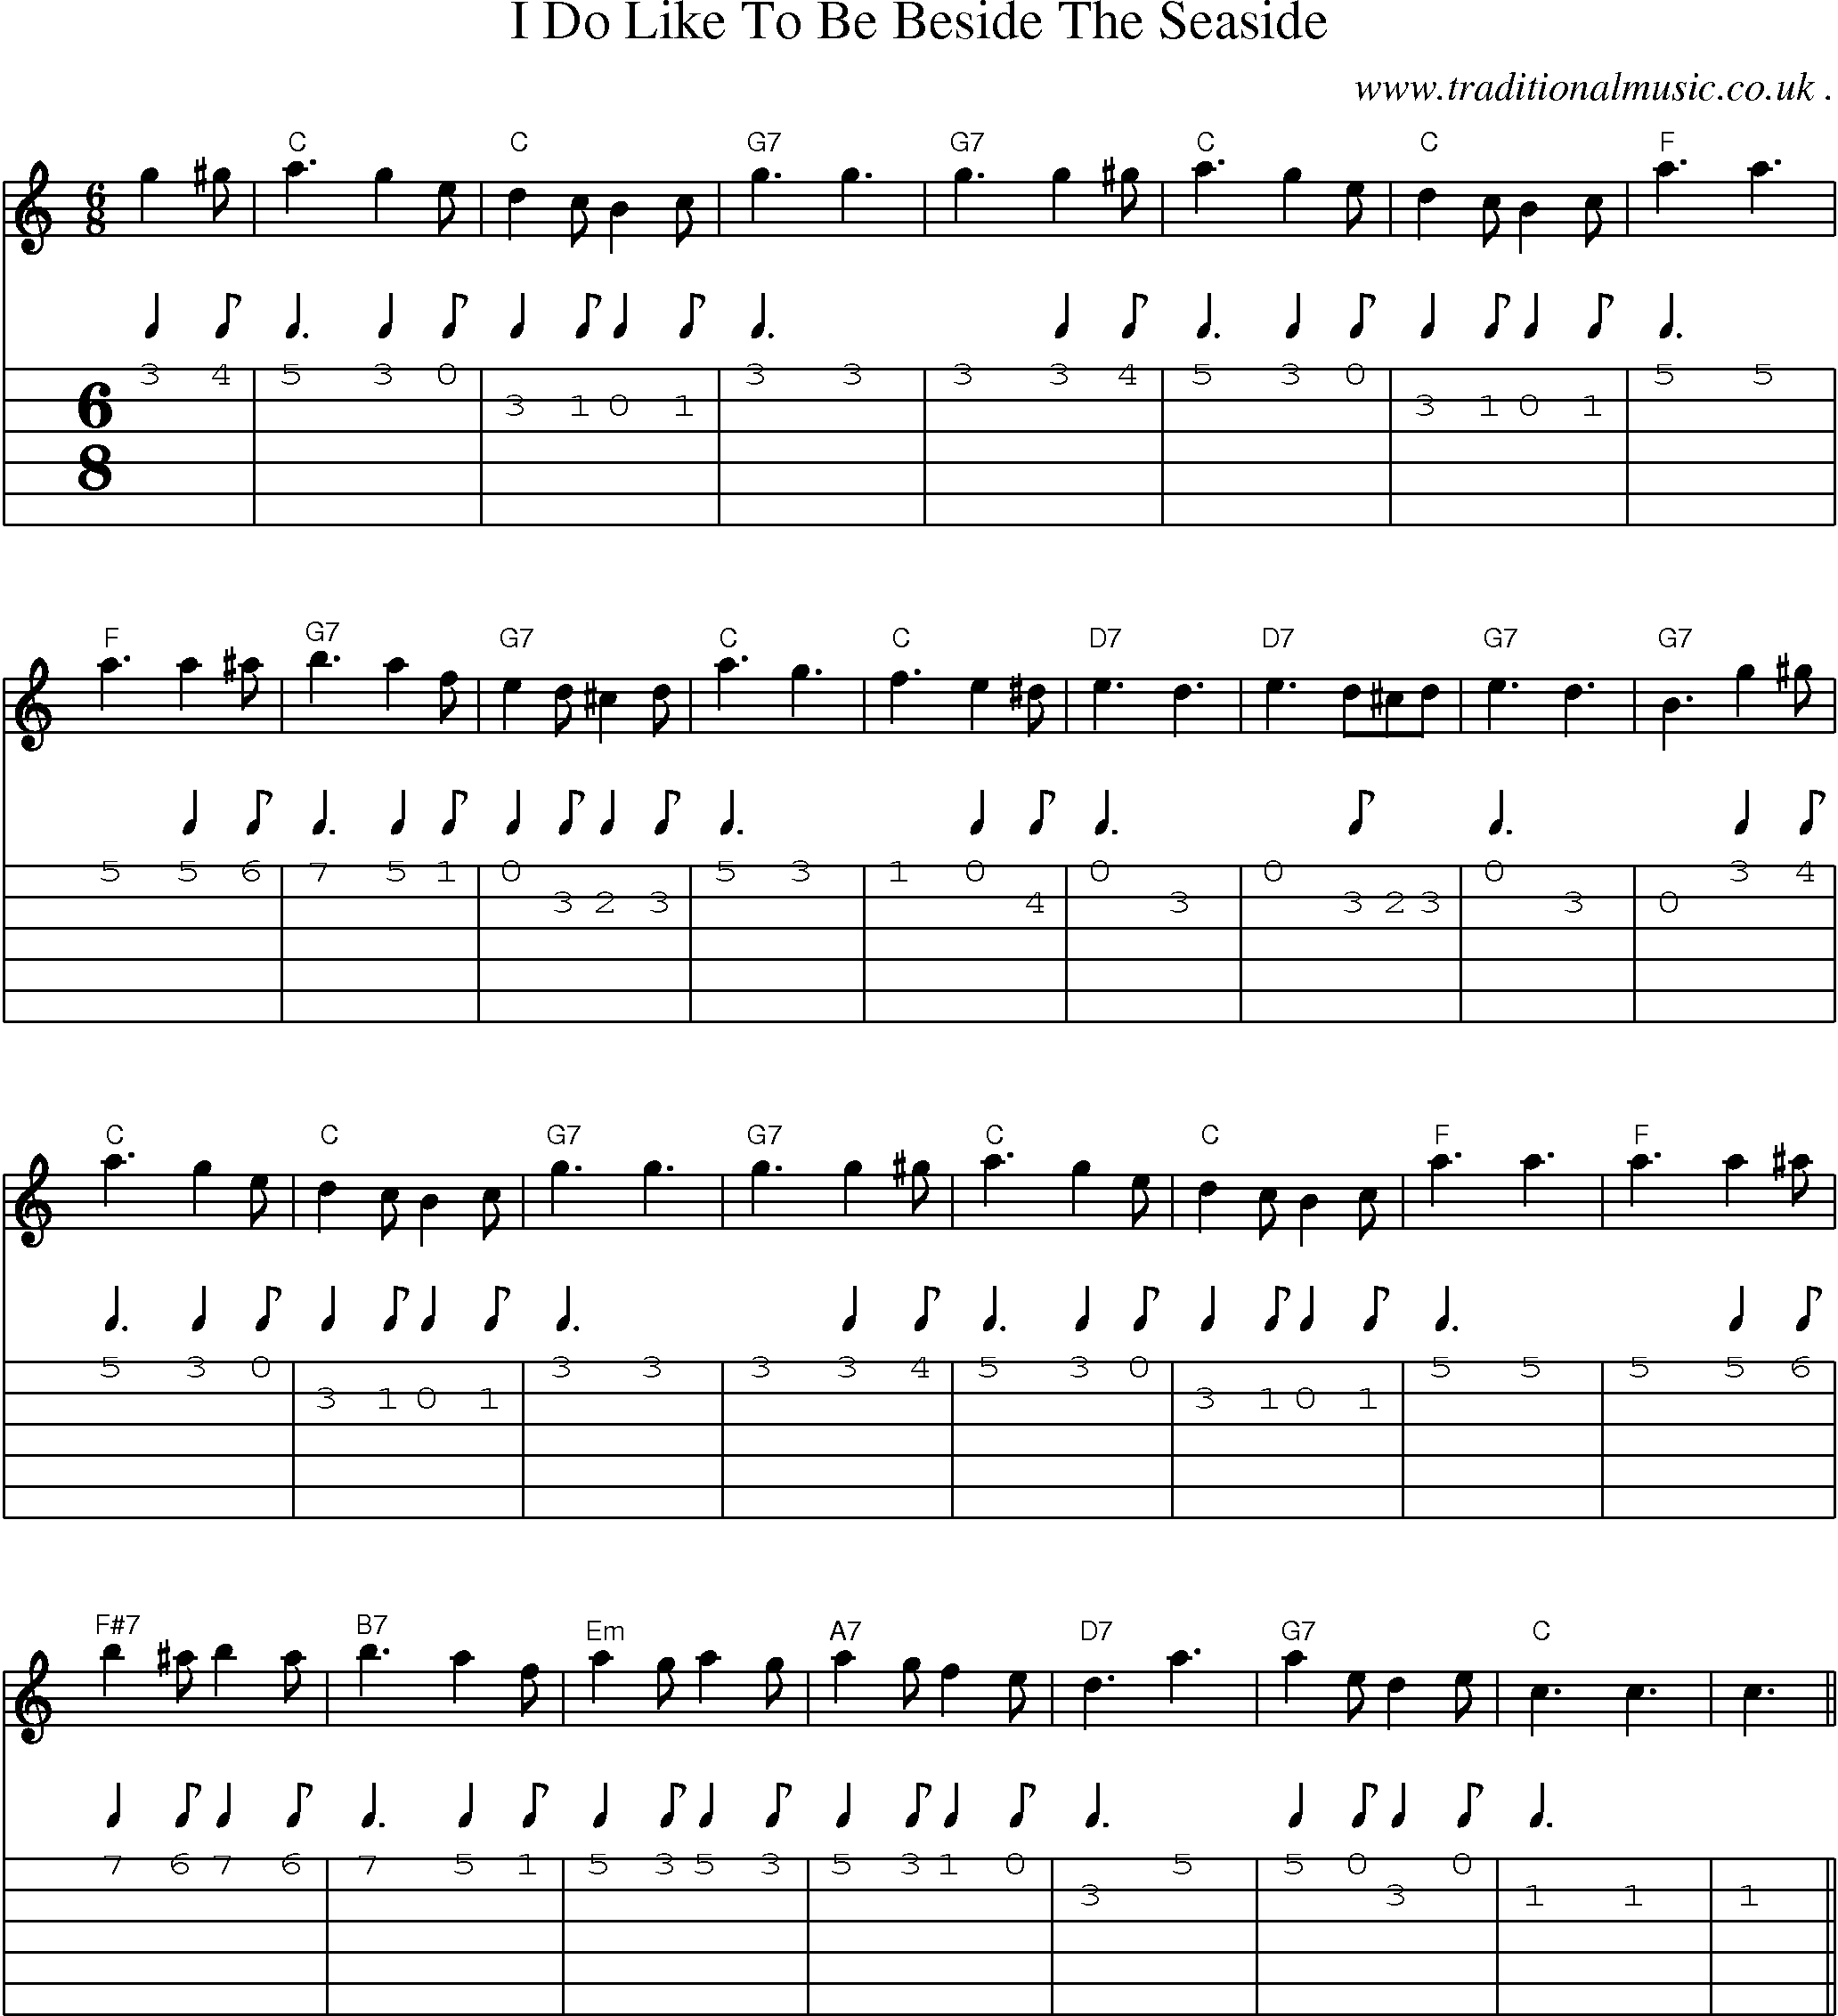 Sheet-Music and Guitar Tabs for I Do Like To Be Beside The Seaside